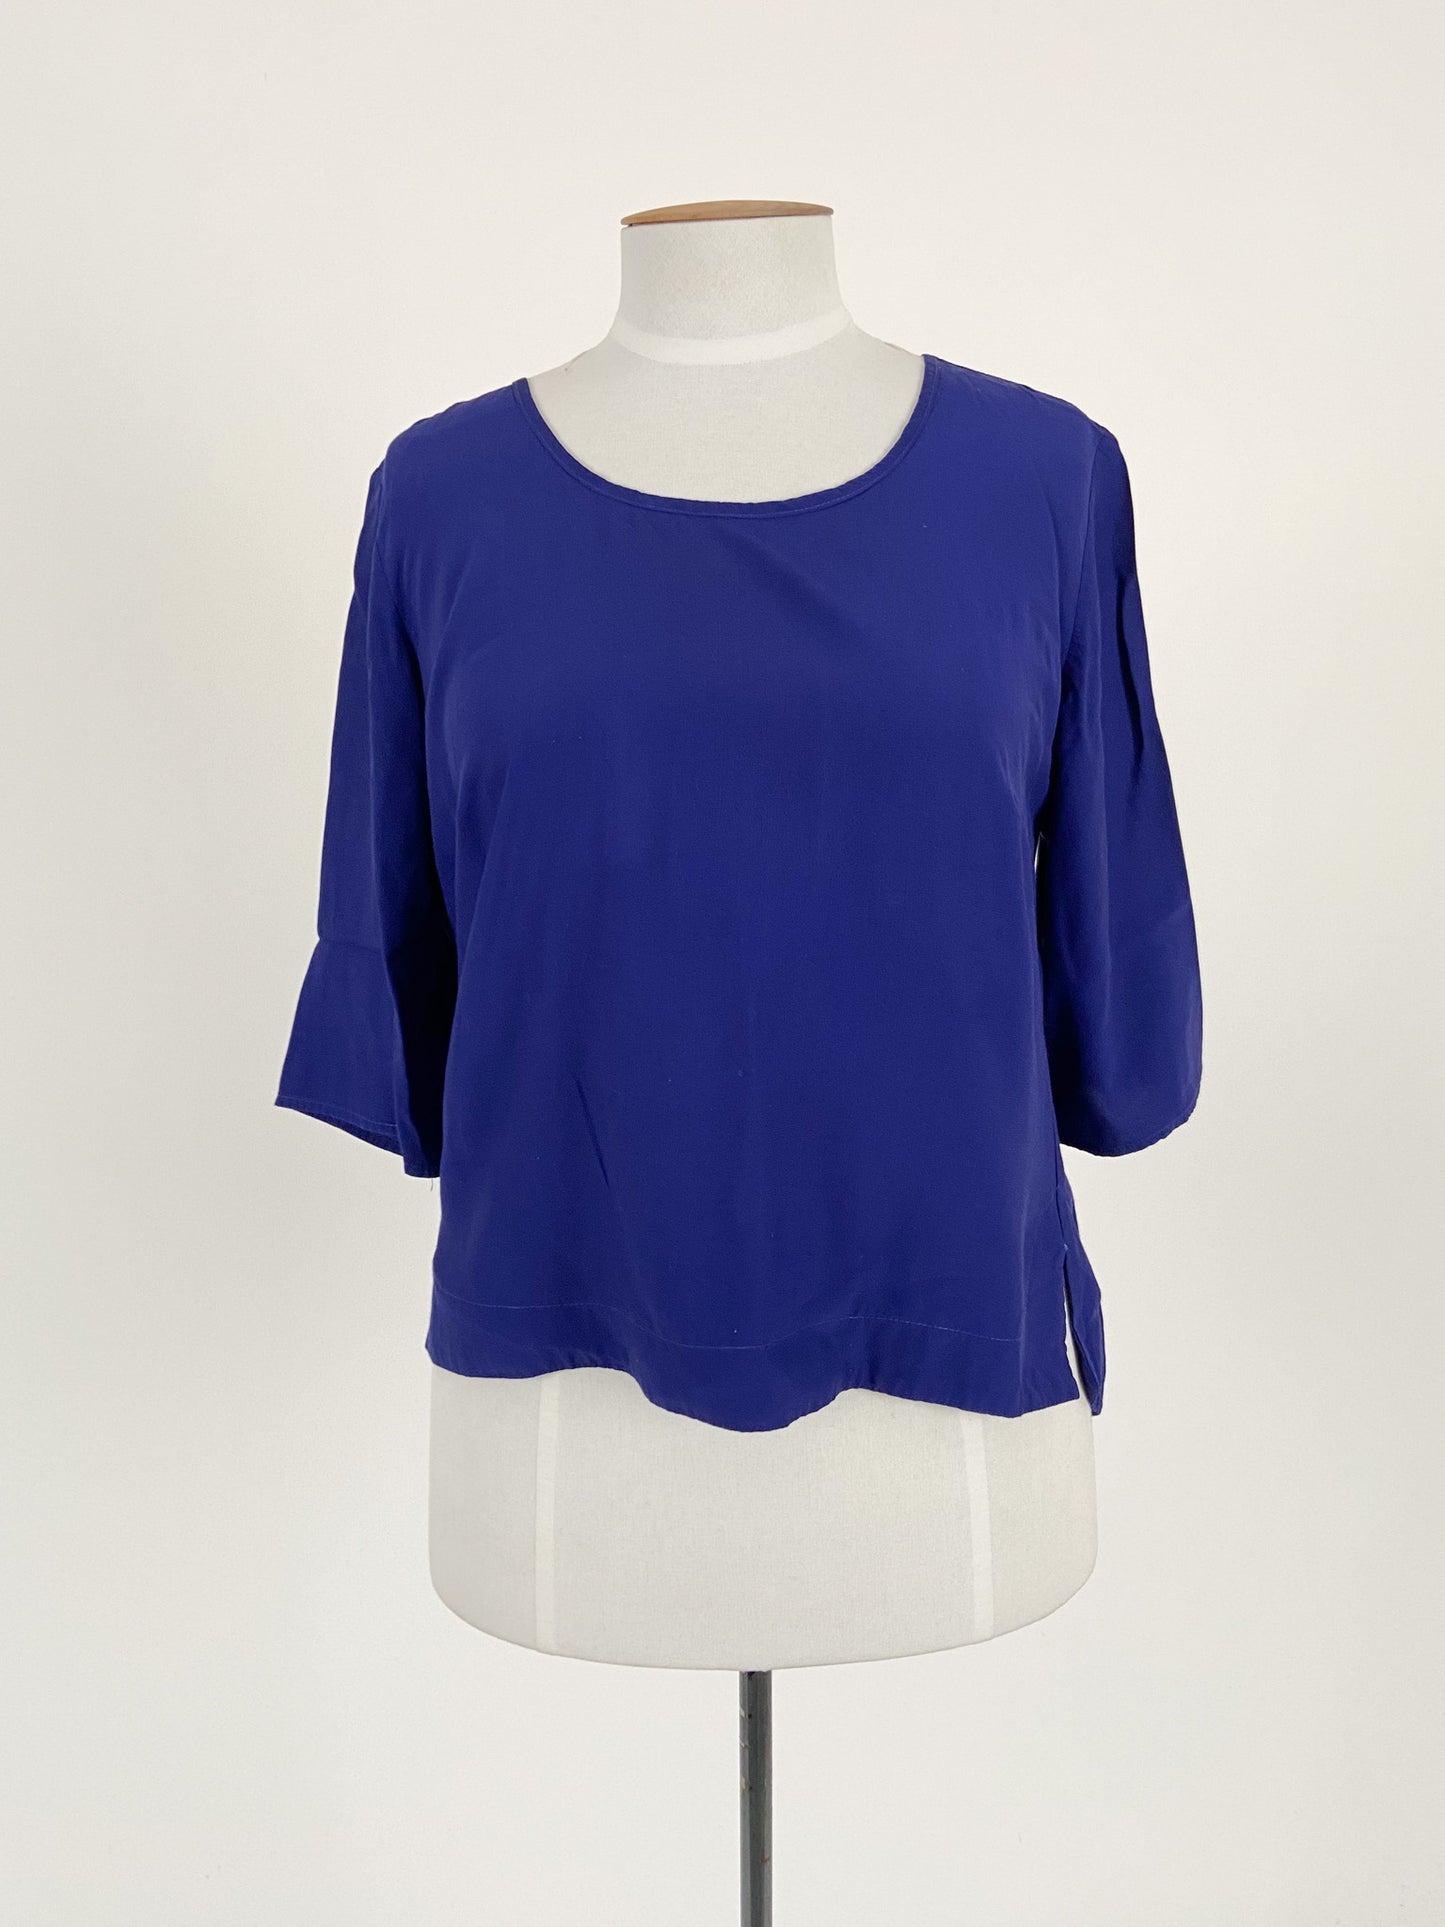 Charmaine Reveley | Navy Casual/Workwear Top | Size 12